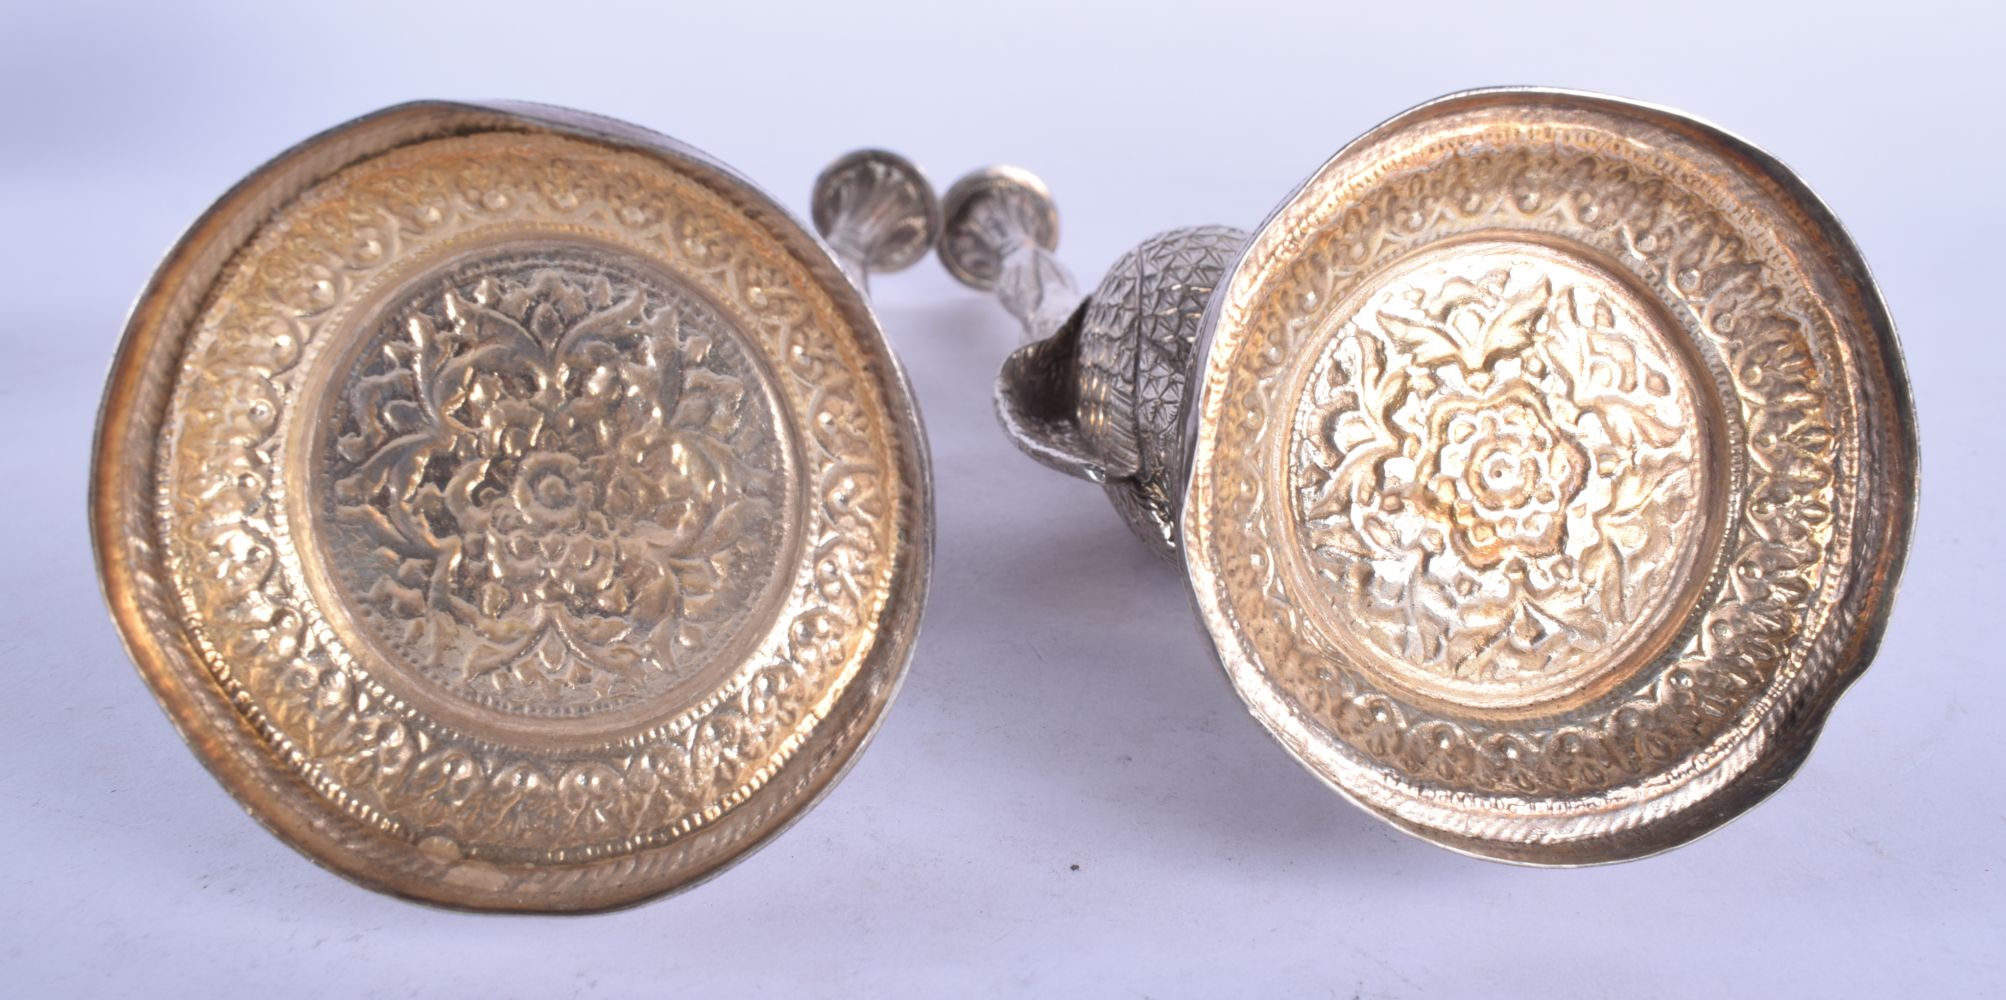 A RARE PAIR OF 19TH CENTURY INDIAN SILVER ROSEWATER SPRINKLERS modelled as birds holding aloft flora - Image 7 of 29